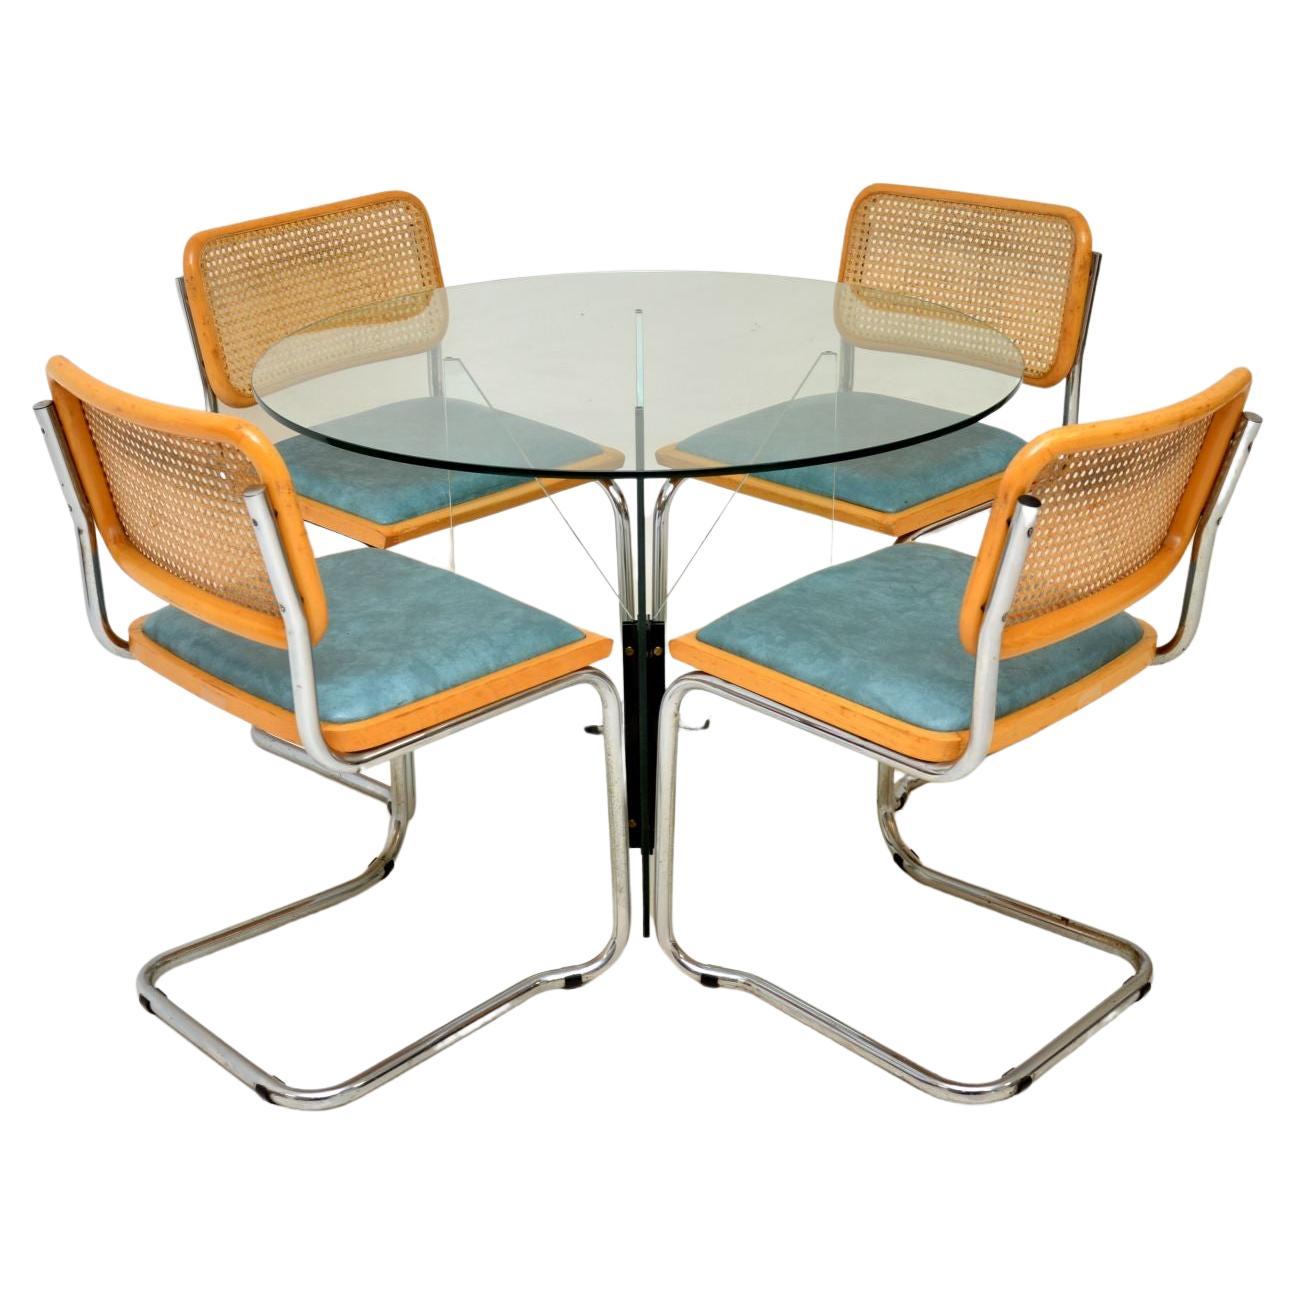 1970s Set of 4 Retro Marcel Breuer Cesca Dining Chairs with Dining Table